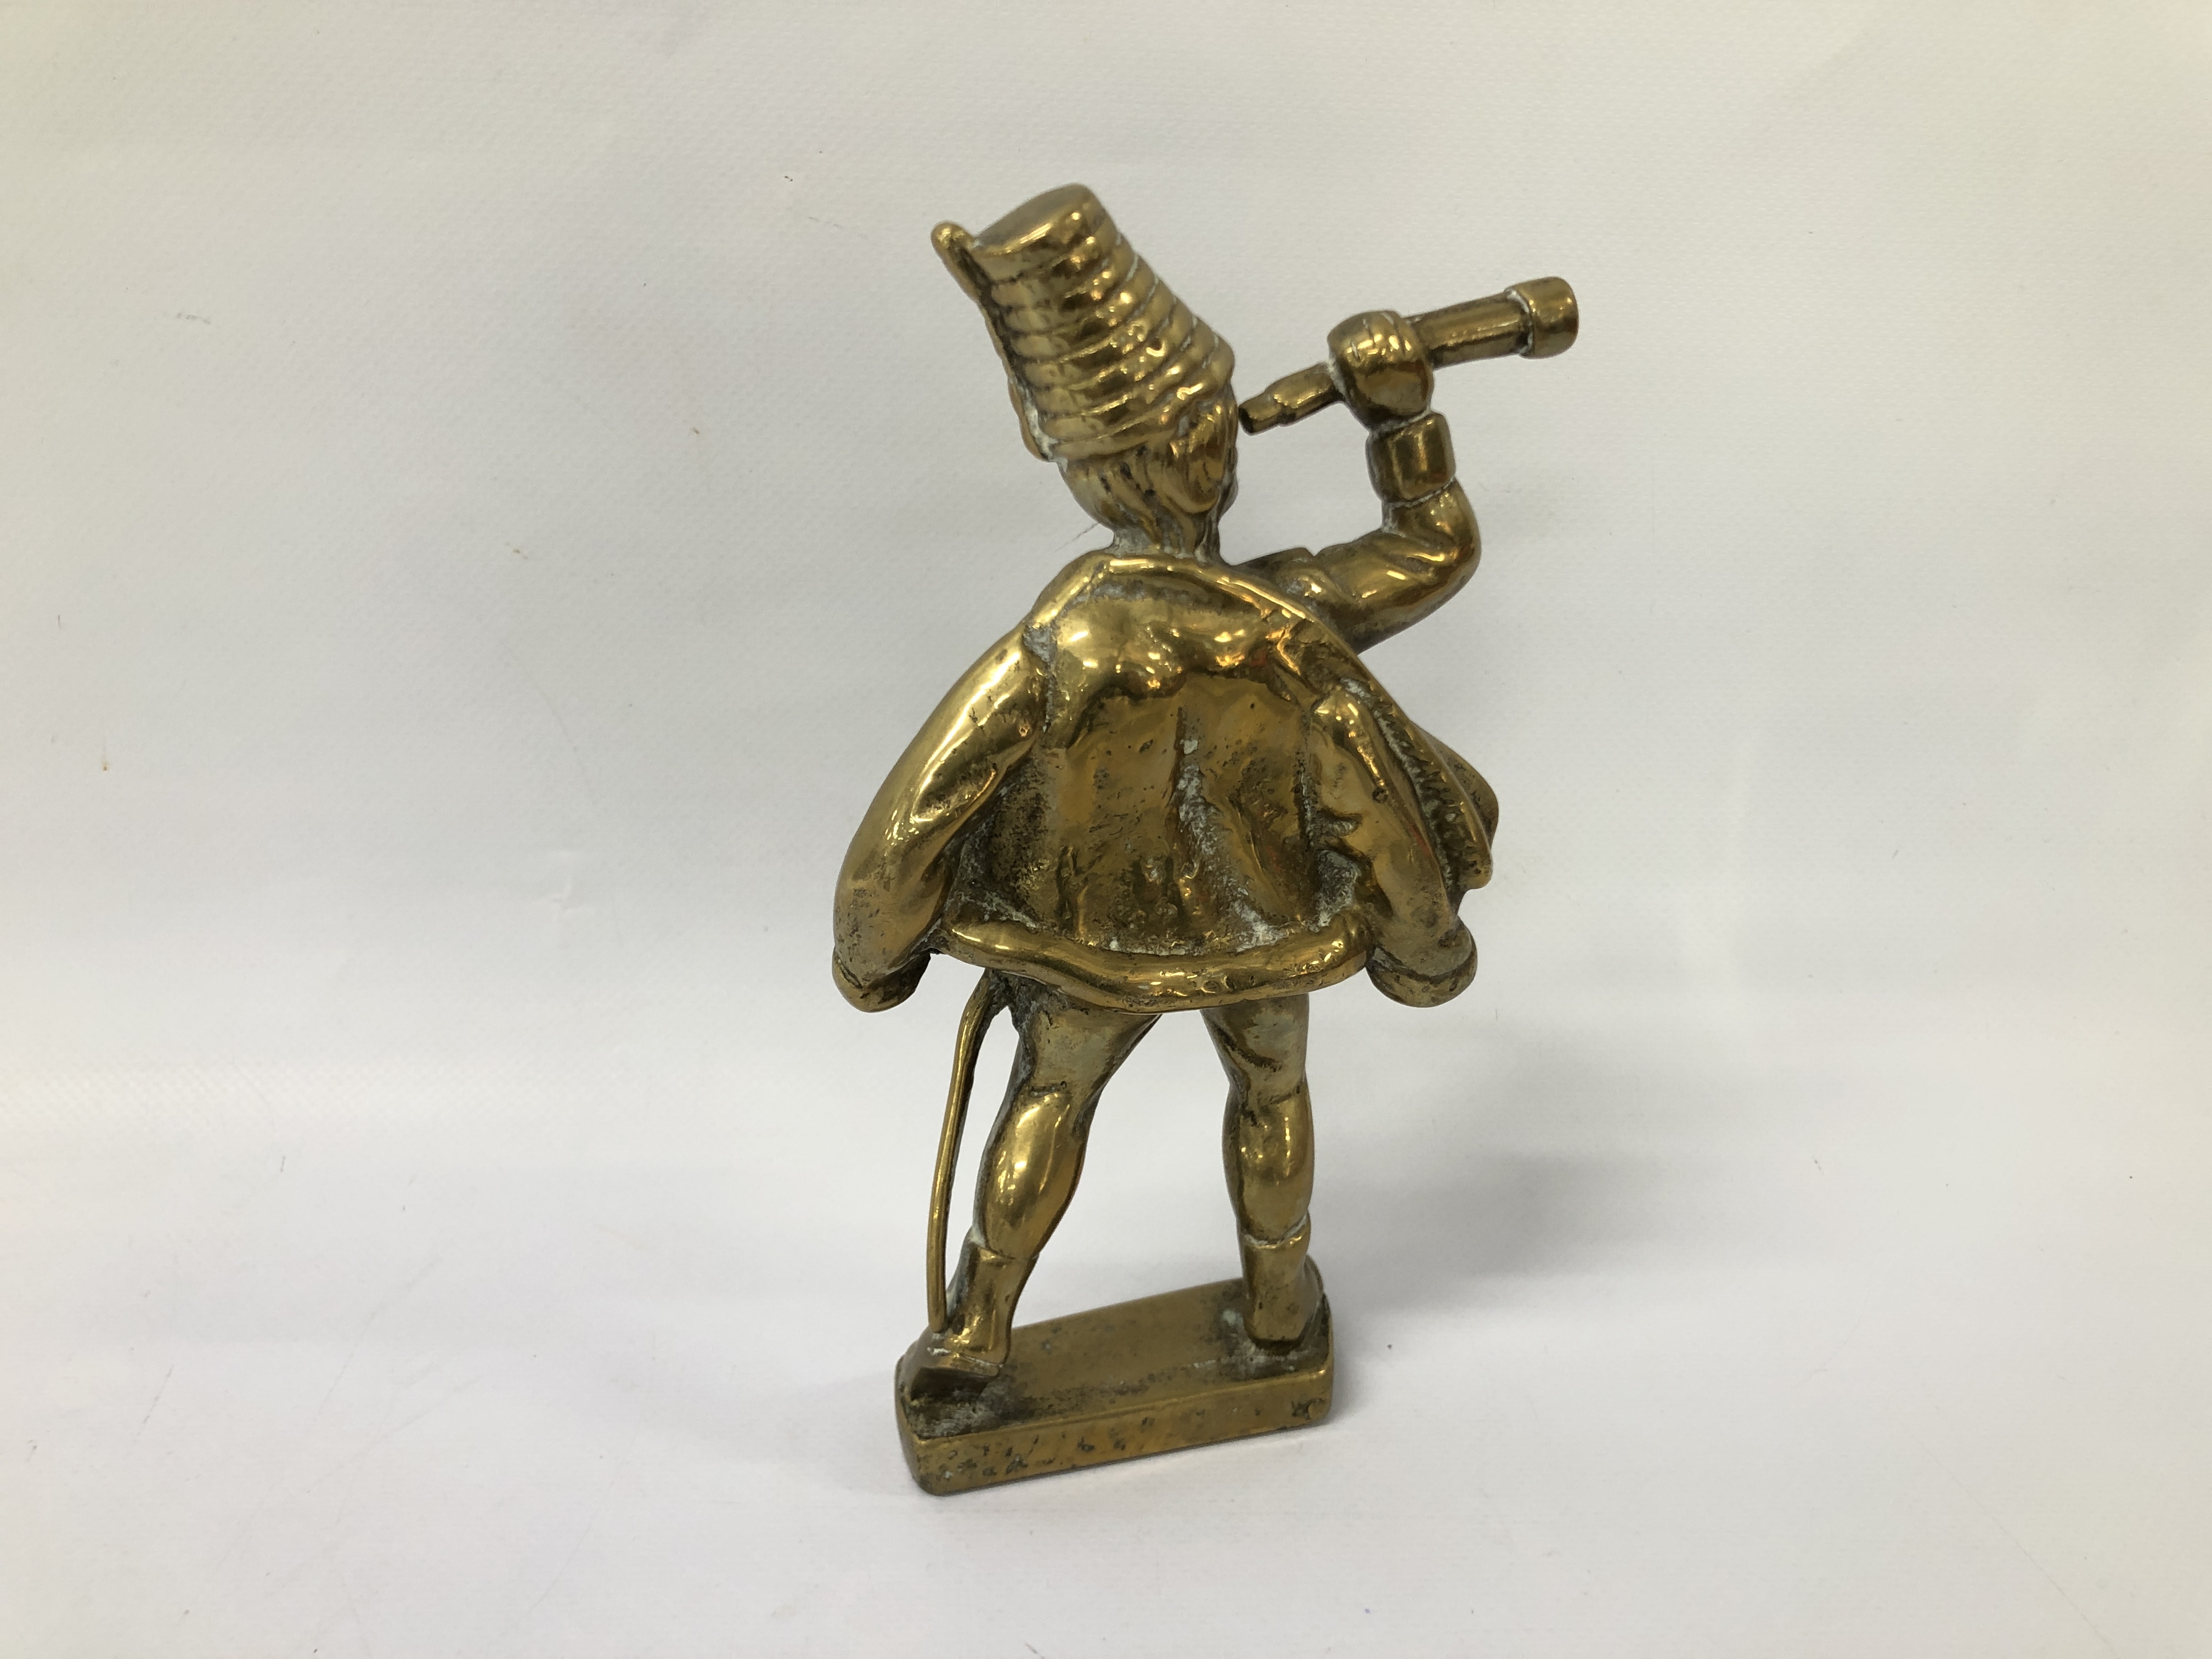 DECORATIVE BRASS INKWELL, HEAVY BRASS KINGFISHER ORNAMENT ON A DECORATIVE ENGRAVED BASE, - Image 10 of 10